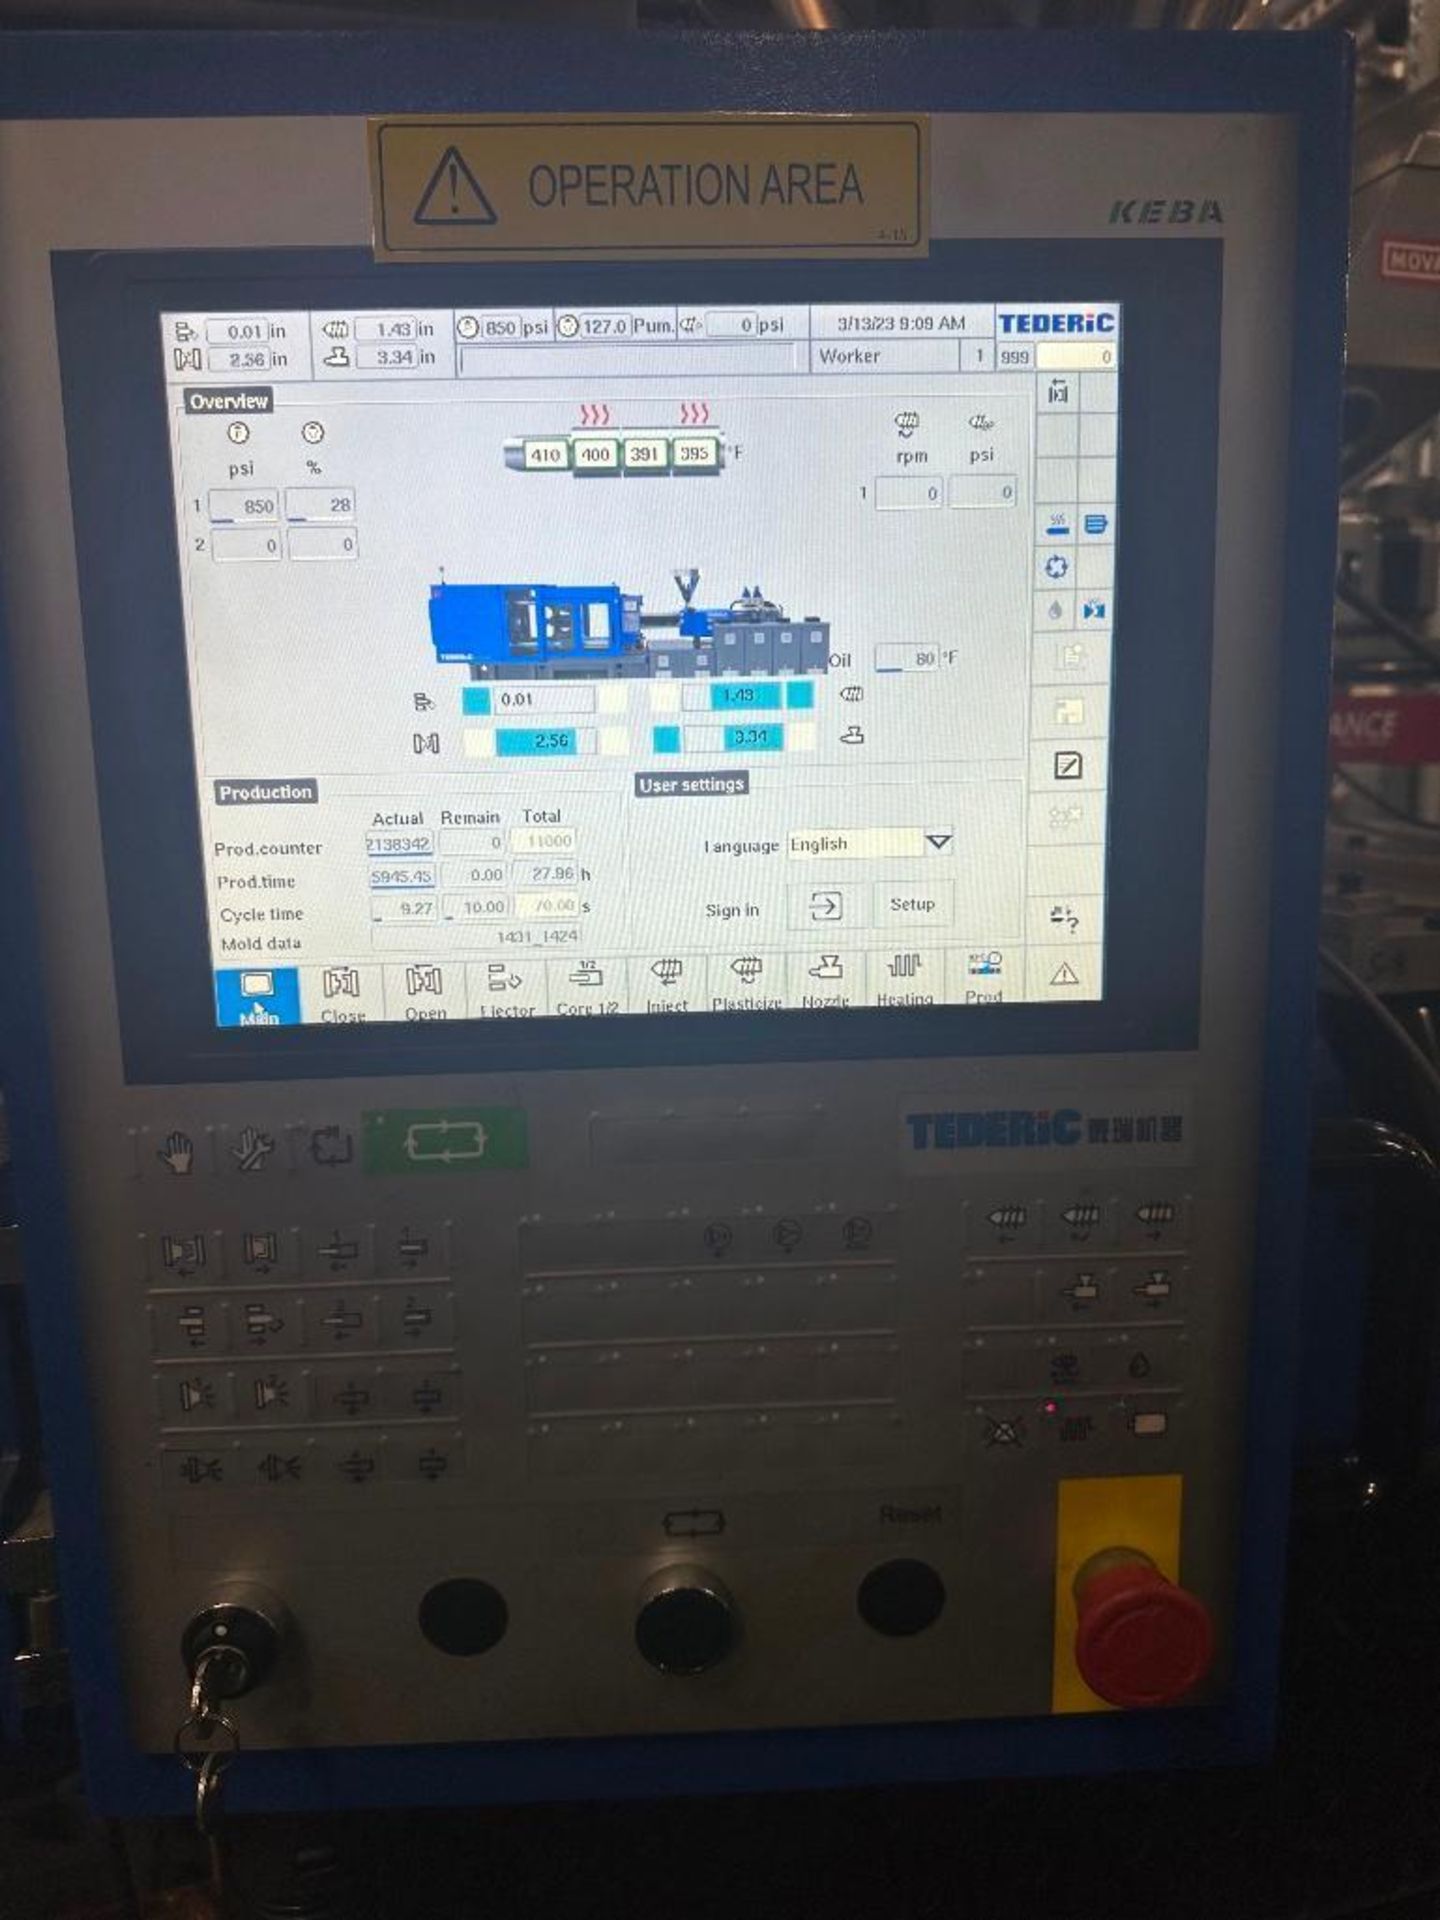 66 Ton Tederic D60 Plastic Injection Molder, Keba 12000 Control, s/n T3008-0200, New 2018 - Image 15 of 17